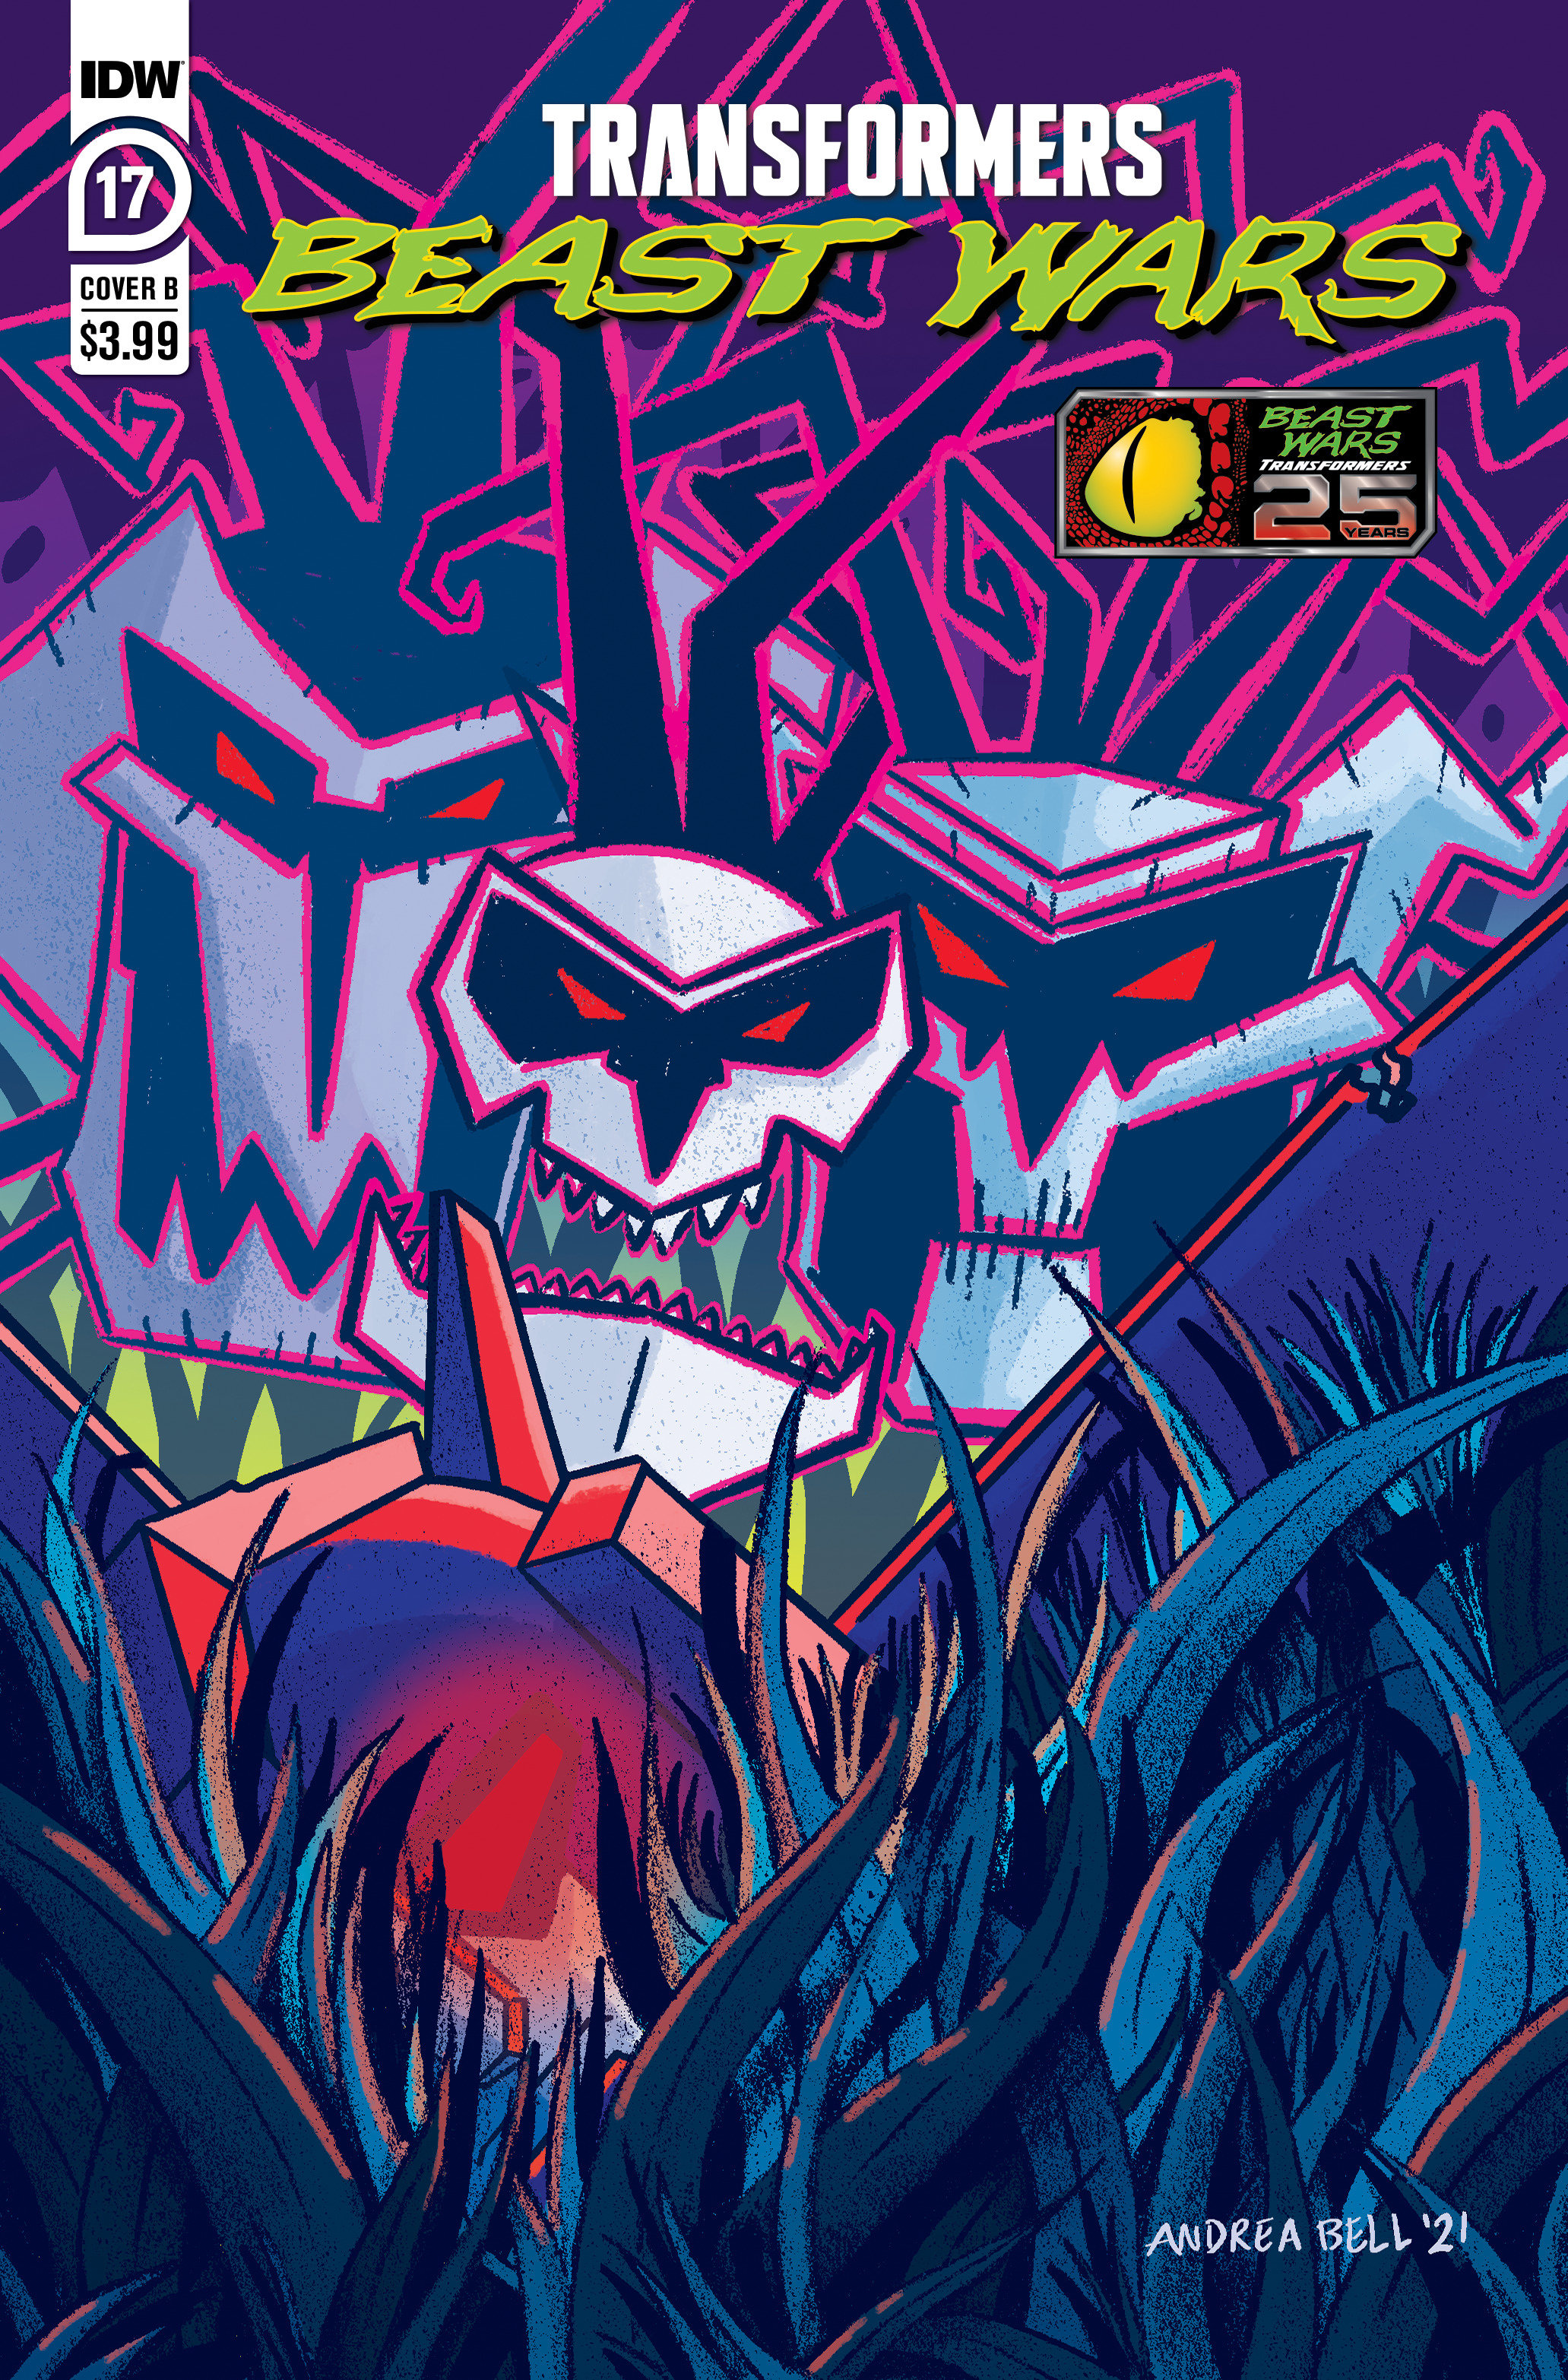 Transformers Beast Wars #17 Cover B Andrea Bell (Of 17)